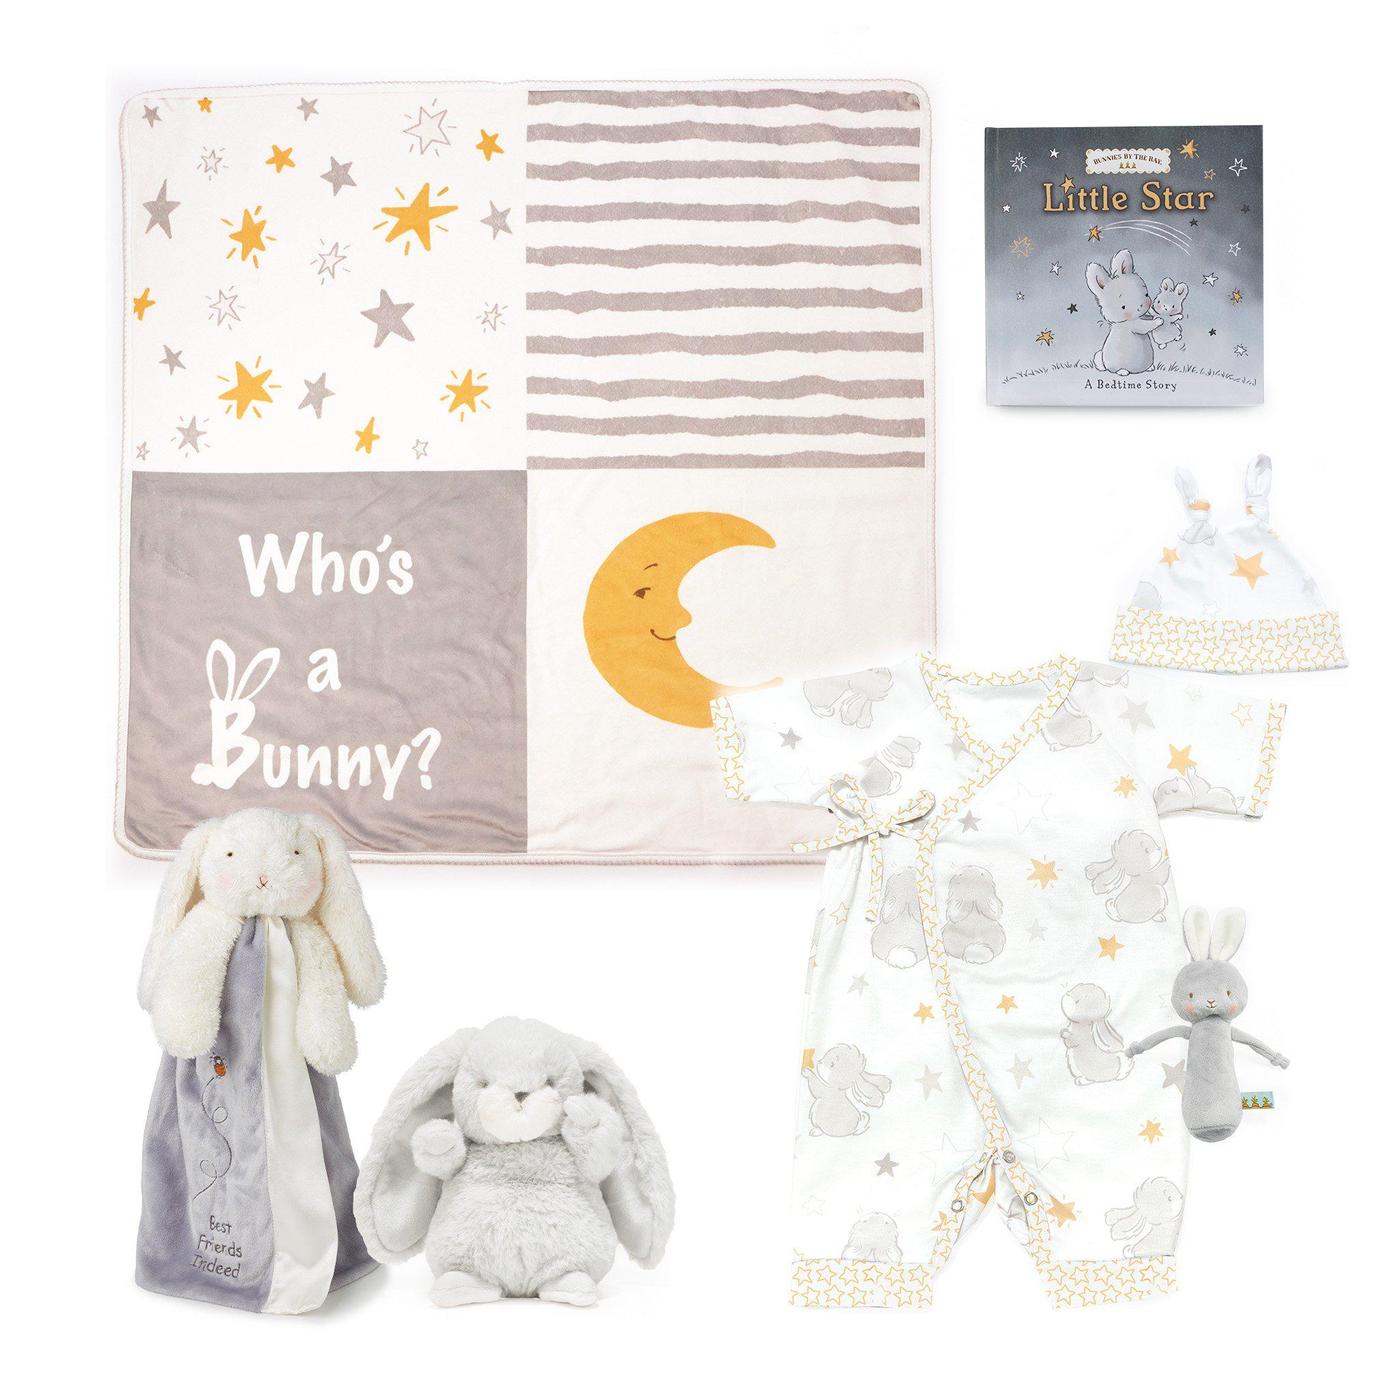 Glad Dreams Large Deluxe Gift Set 0-3 Months